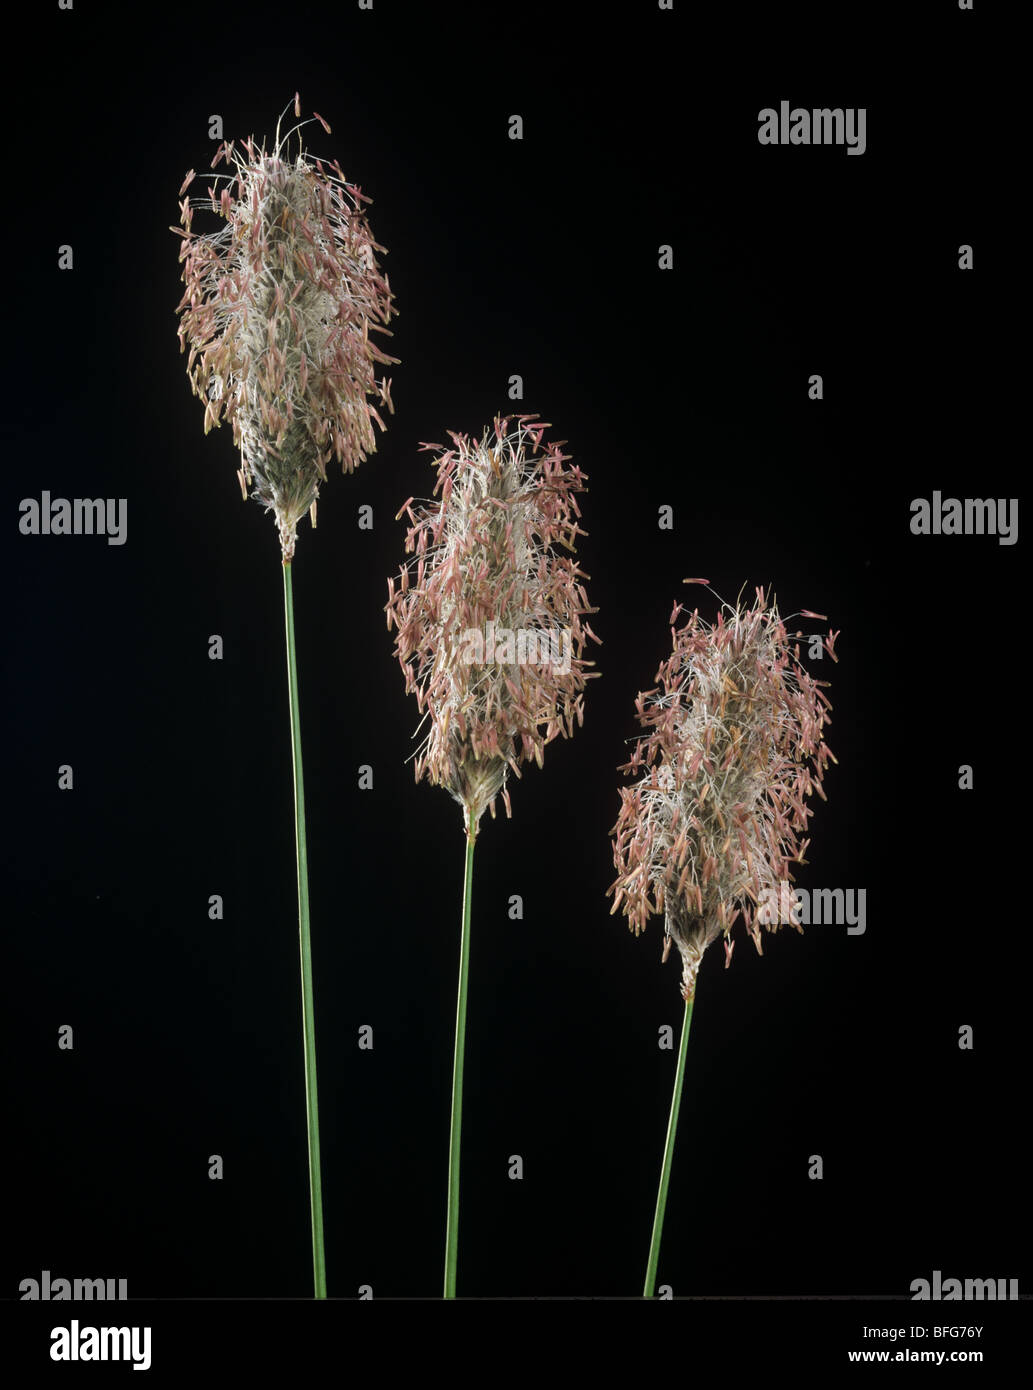 Meadow foxtail (Alopecurus pratensis) grass flower spikes Stock Photo